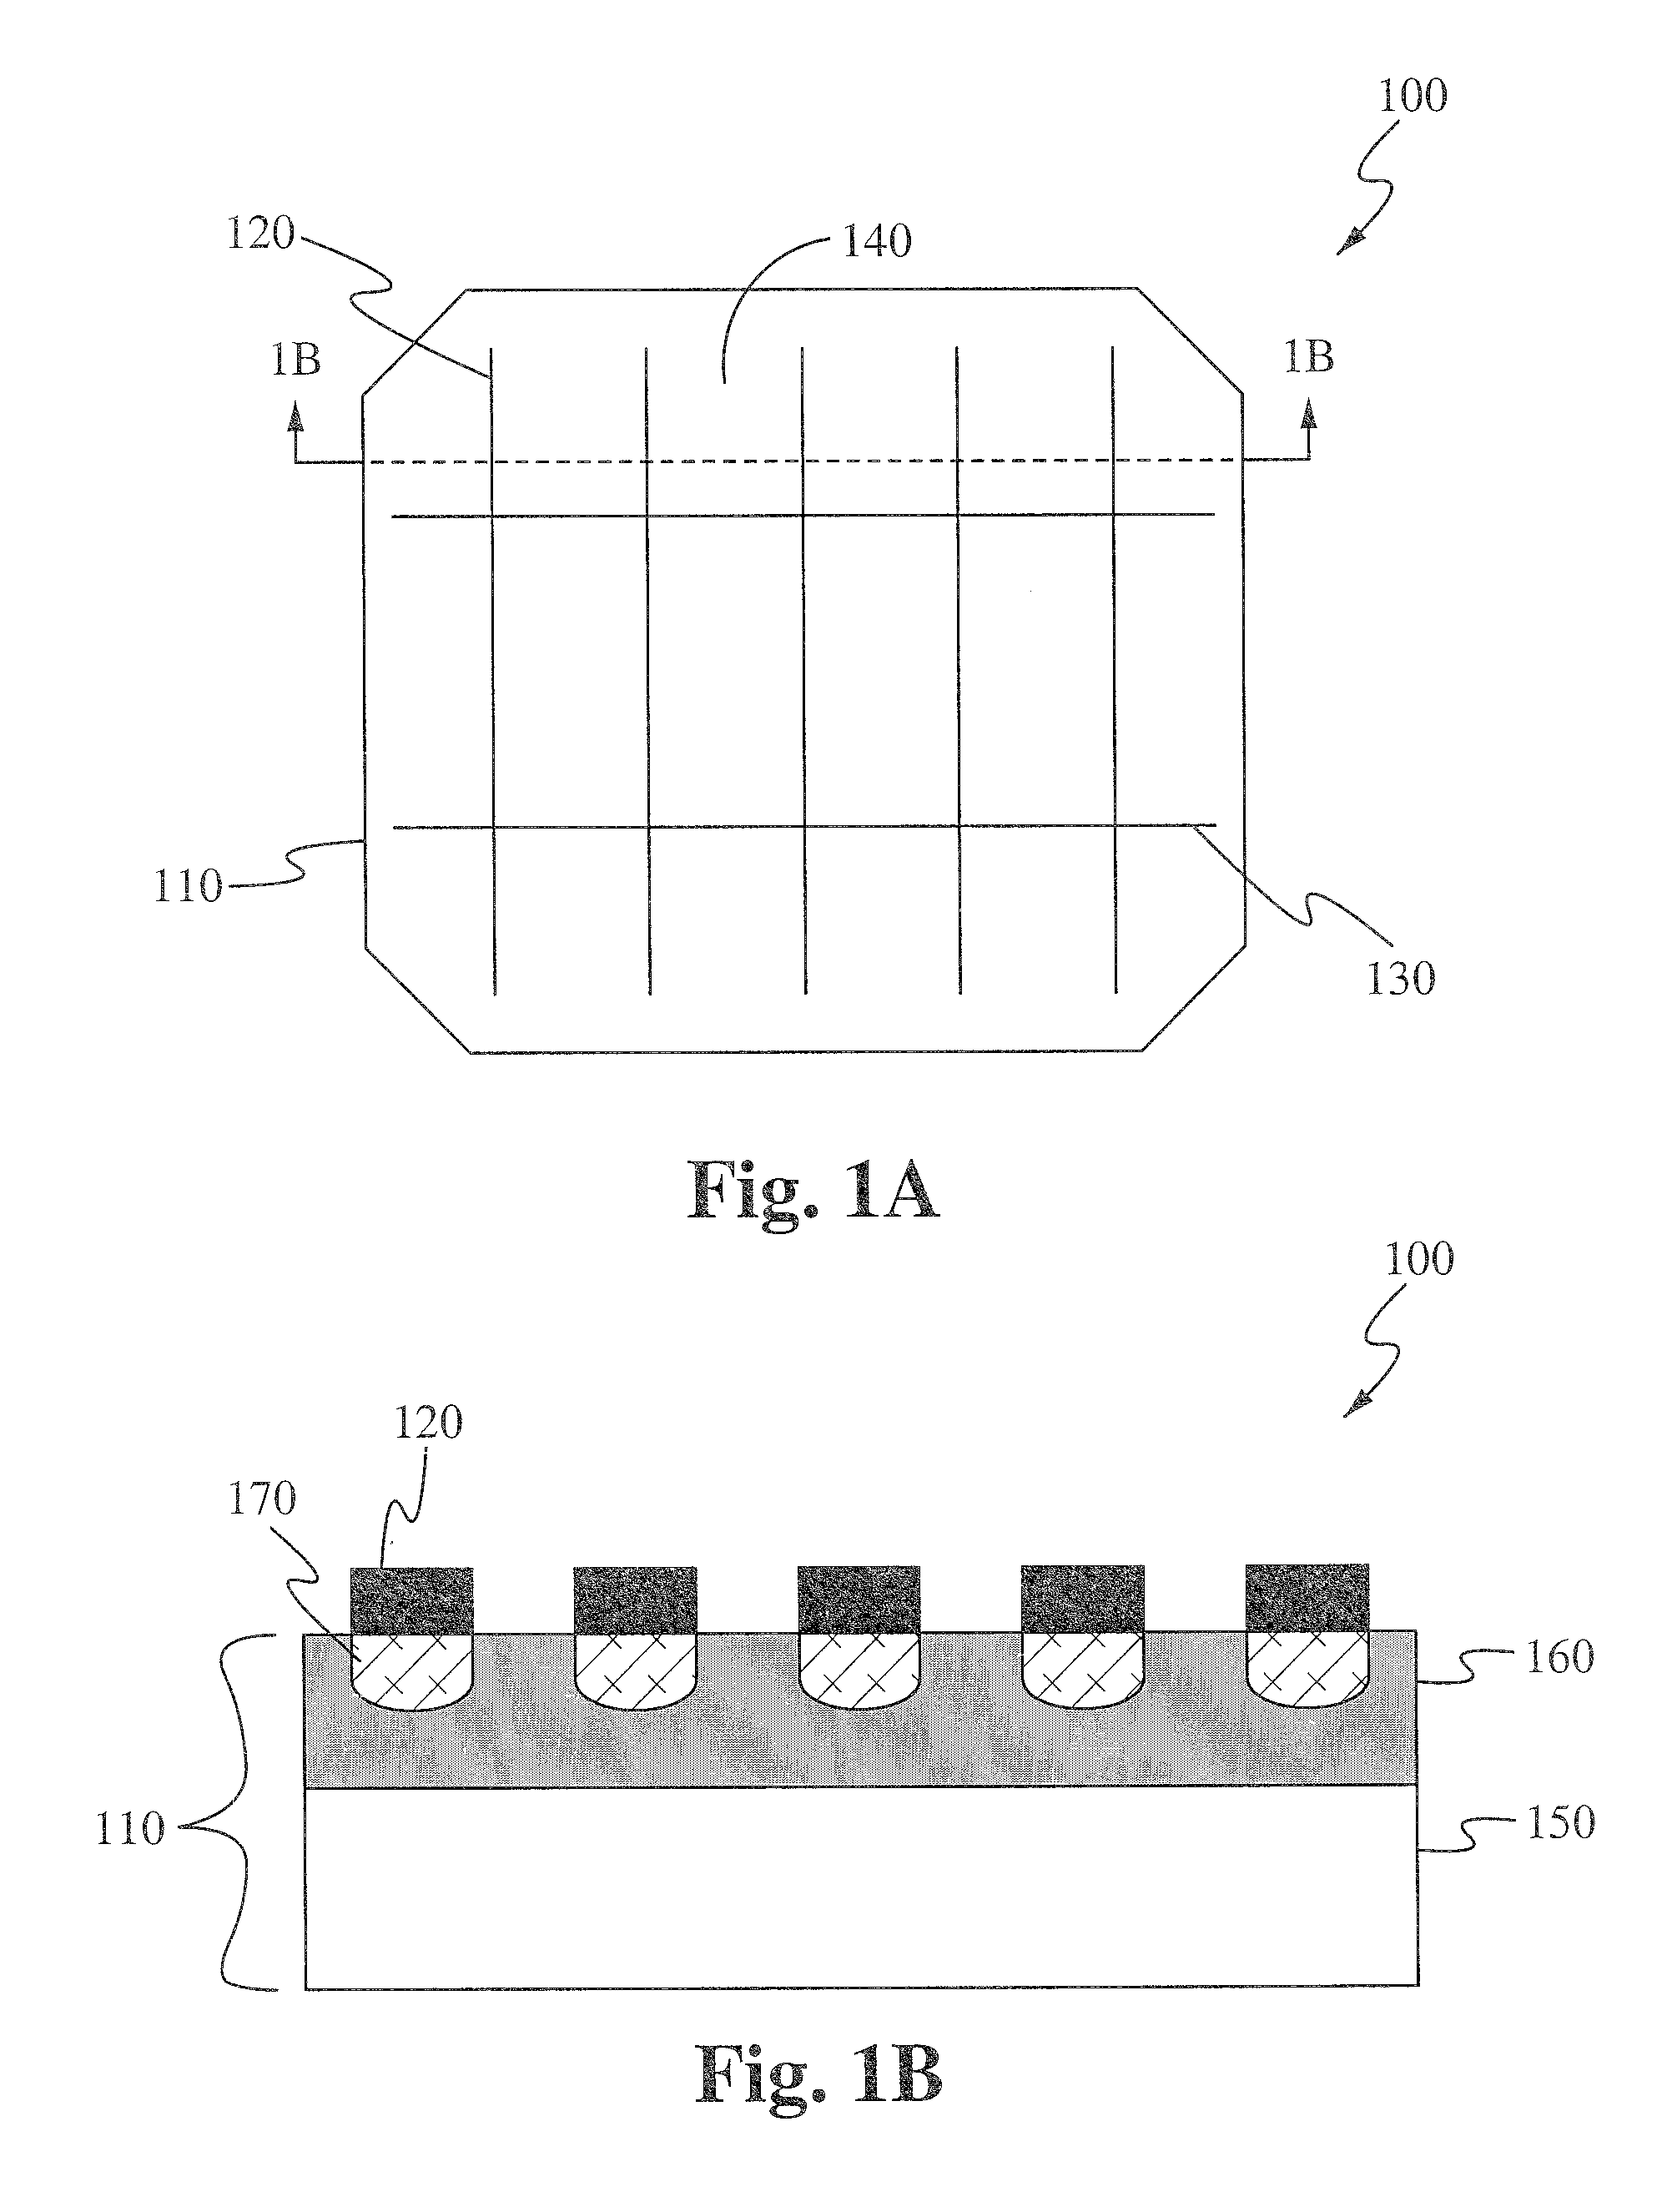 Formation of solar cell-selective emitter using implant and anneal method